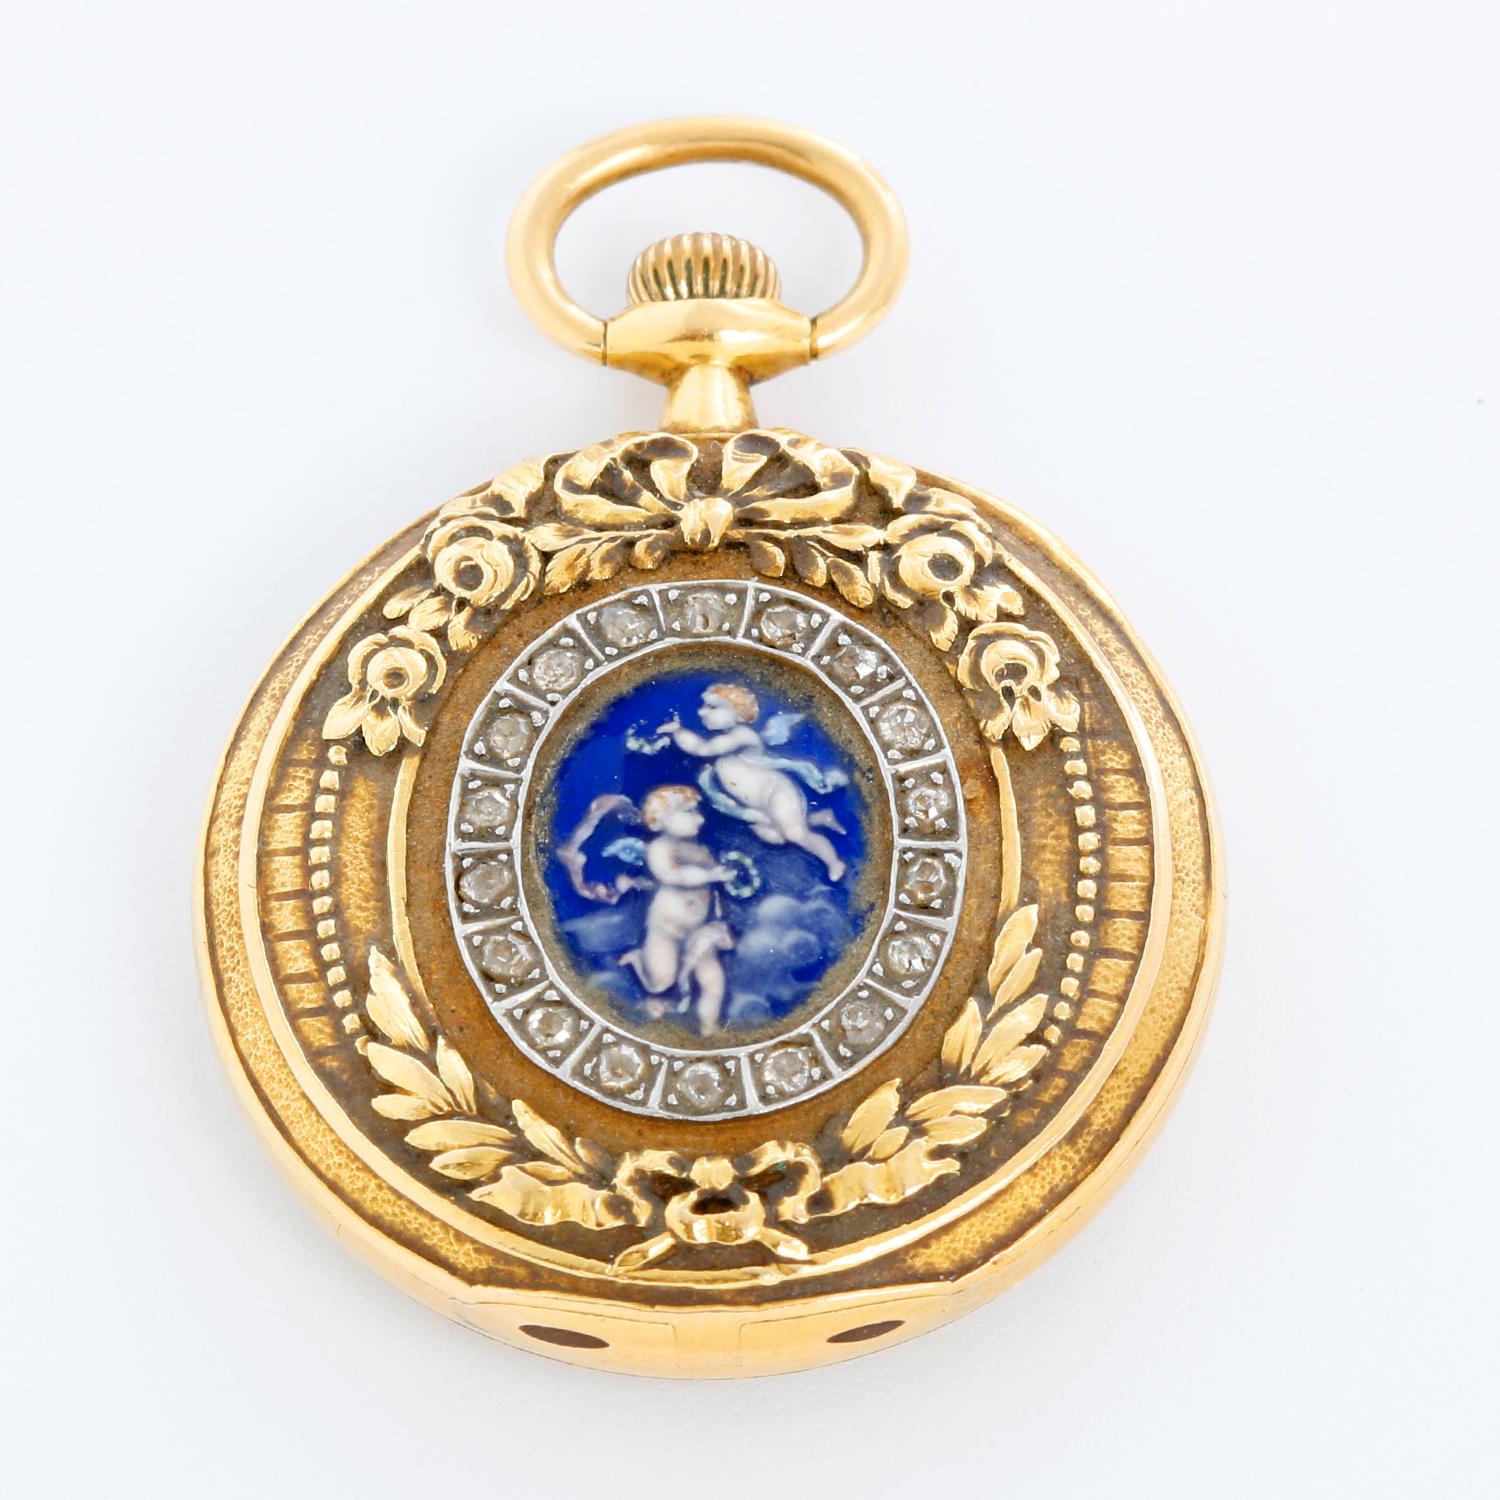 Tiffany & Co. Enameled 18K Yellow Gold Pocket Watch Brooch - Manual winding. 18K yellow gold; reverse pictures an impeccably executed enamel of two angels with diamonds surrounded ( 27.4 mm ). White dial with a double sunk dial with Arabic numerals